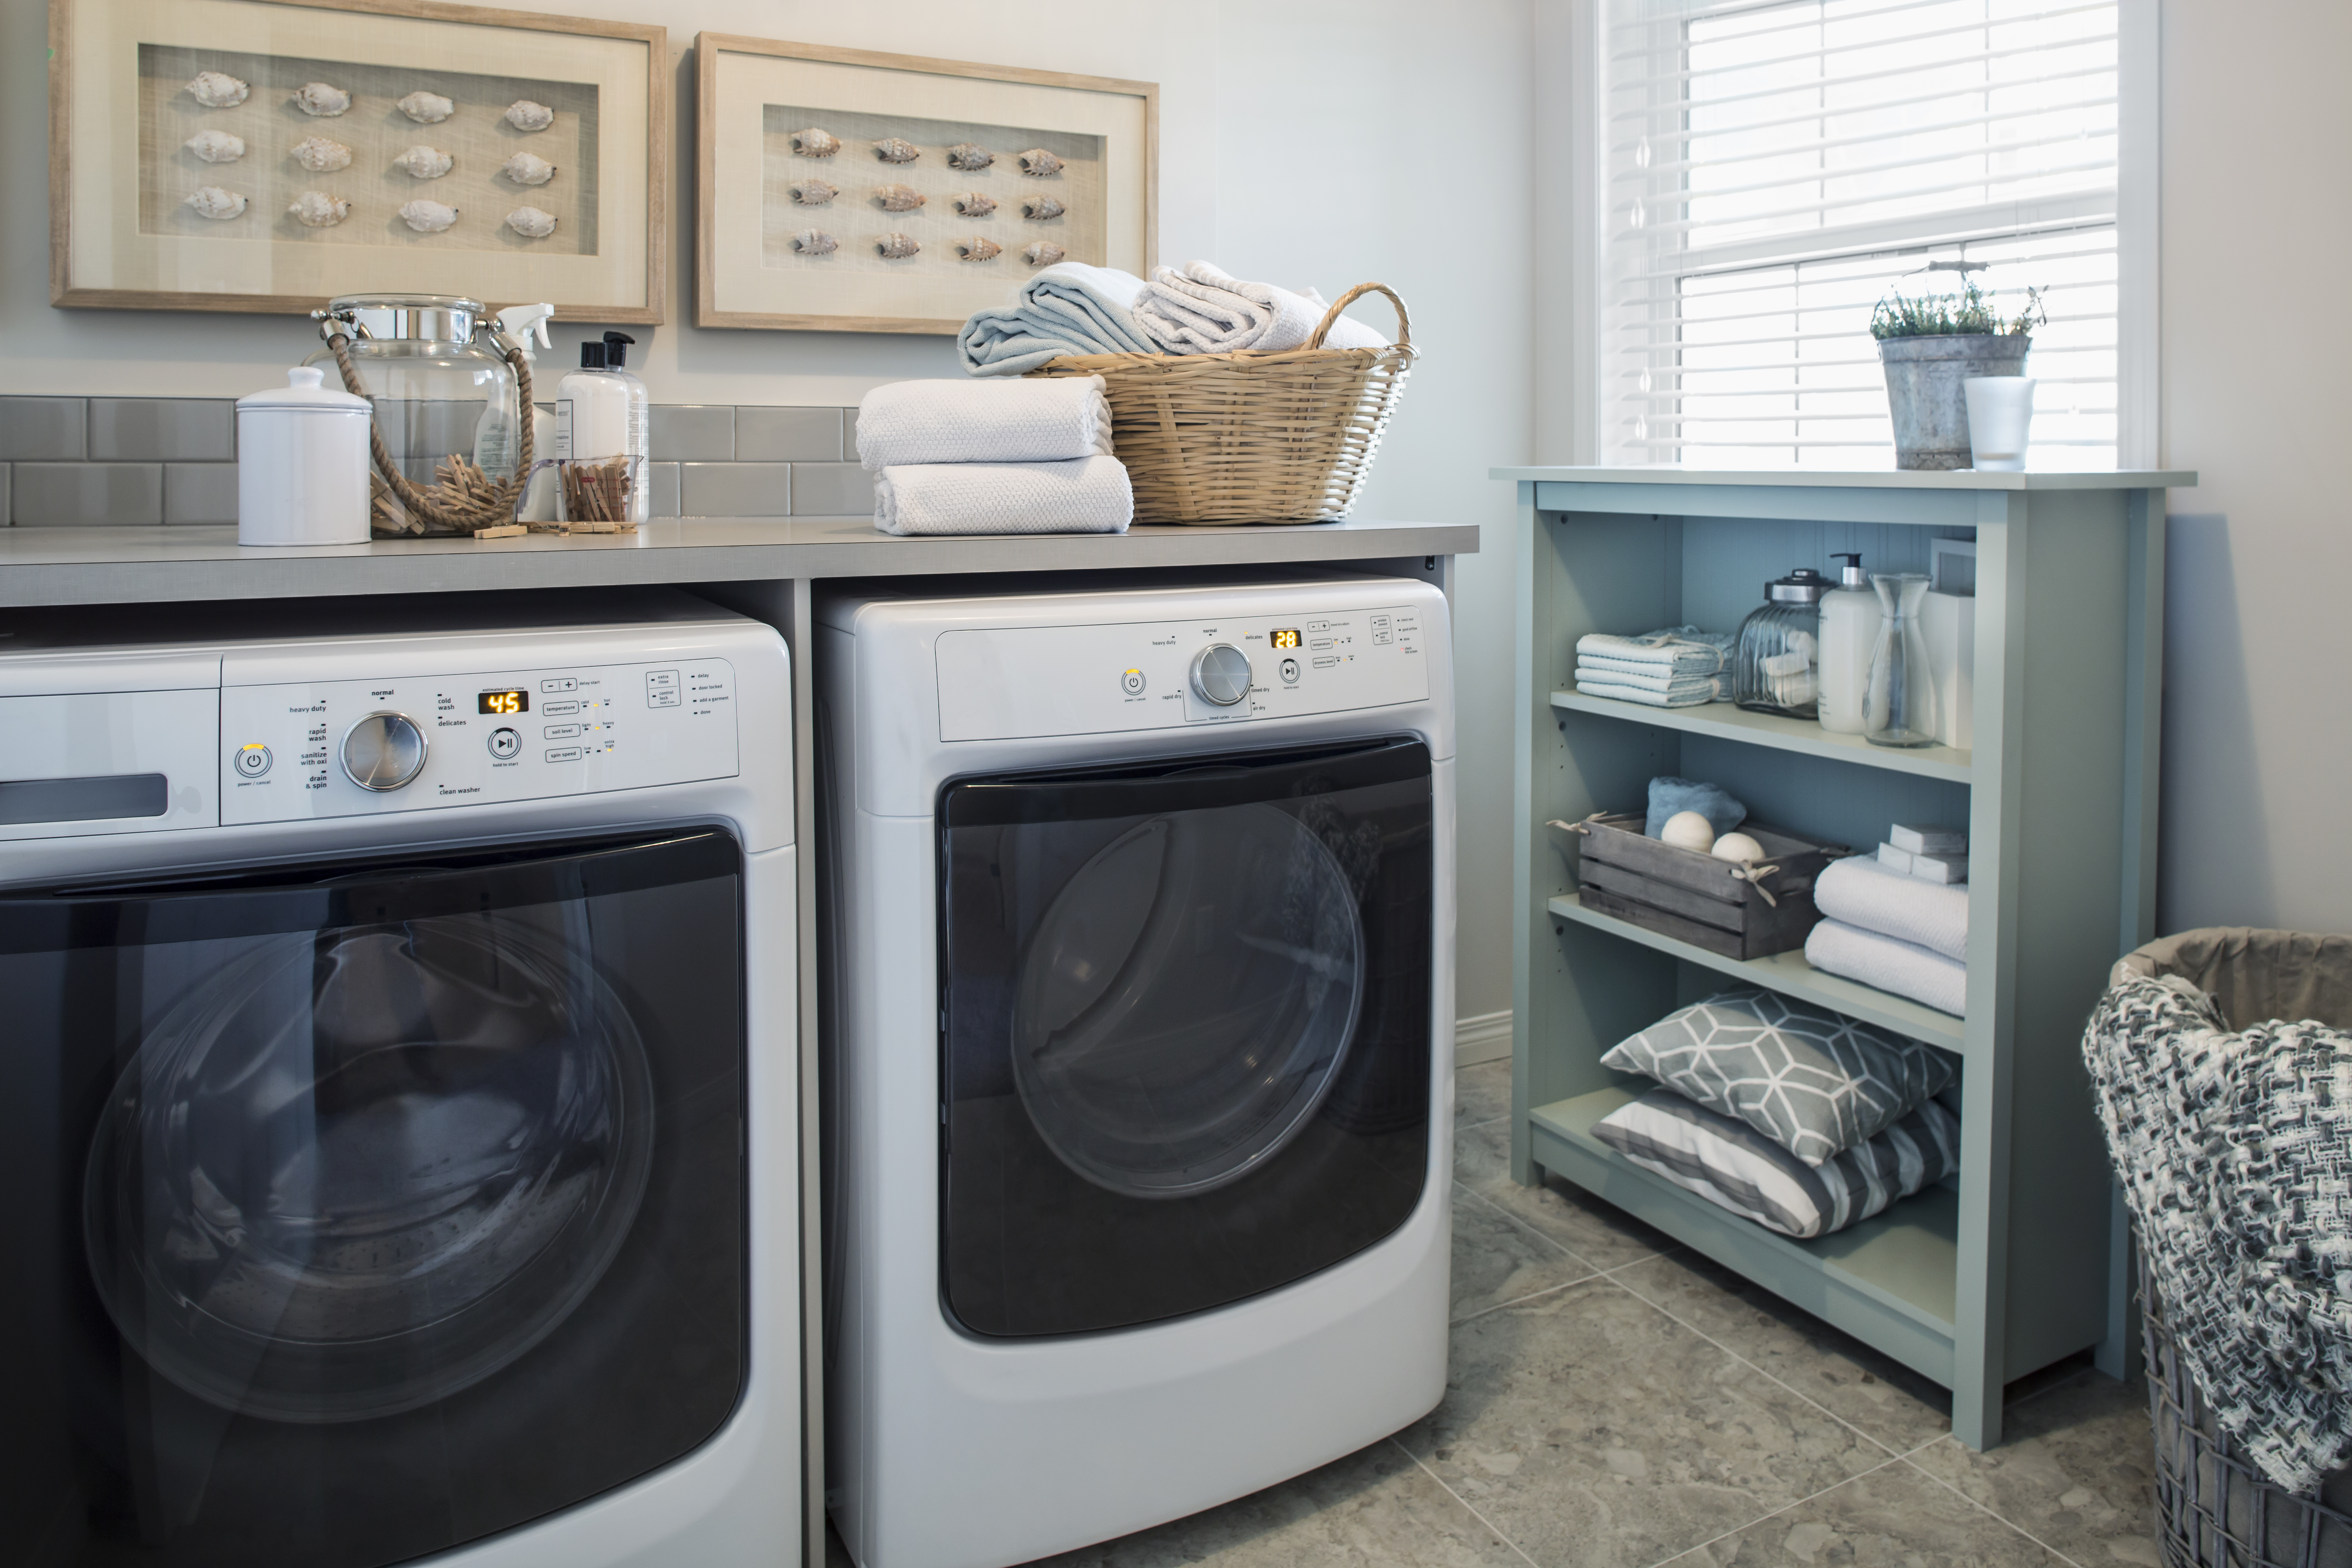 Moving a washer using an Airsled  Need to move bulky laundry room  appliances in tight spaces? See how easily and safely you can move stand  alone and stackable washers and dryers